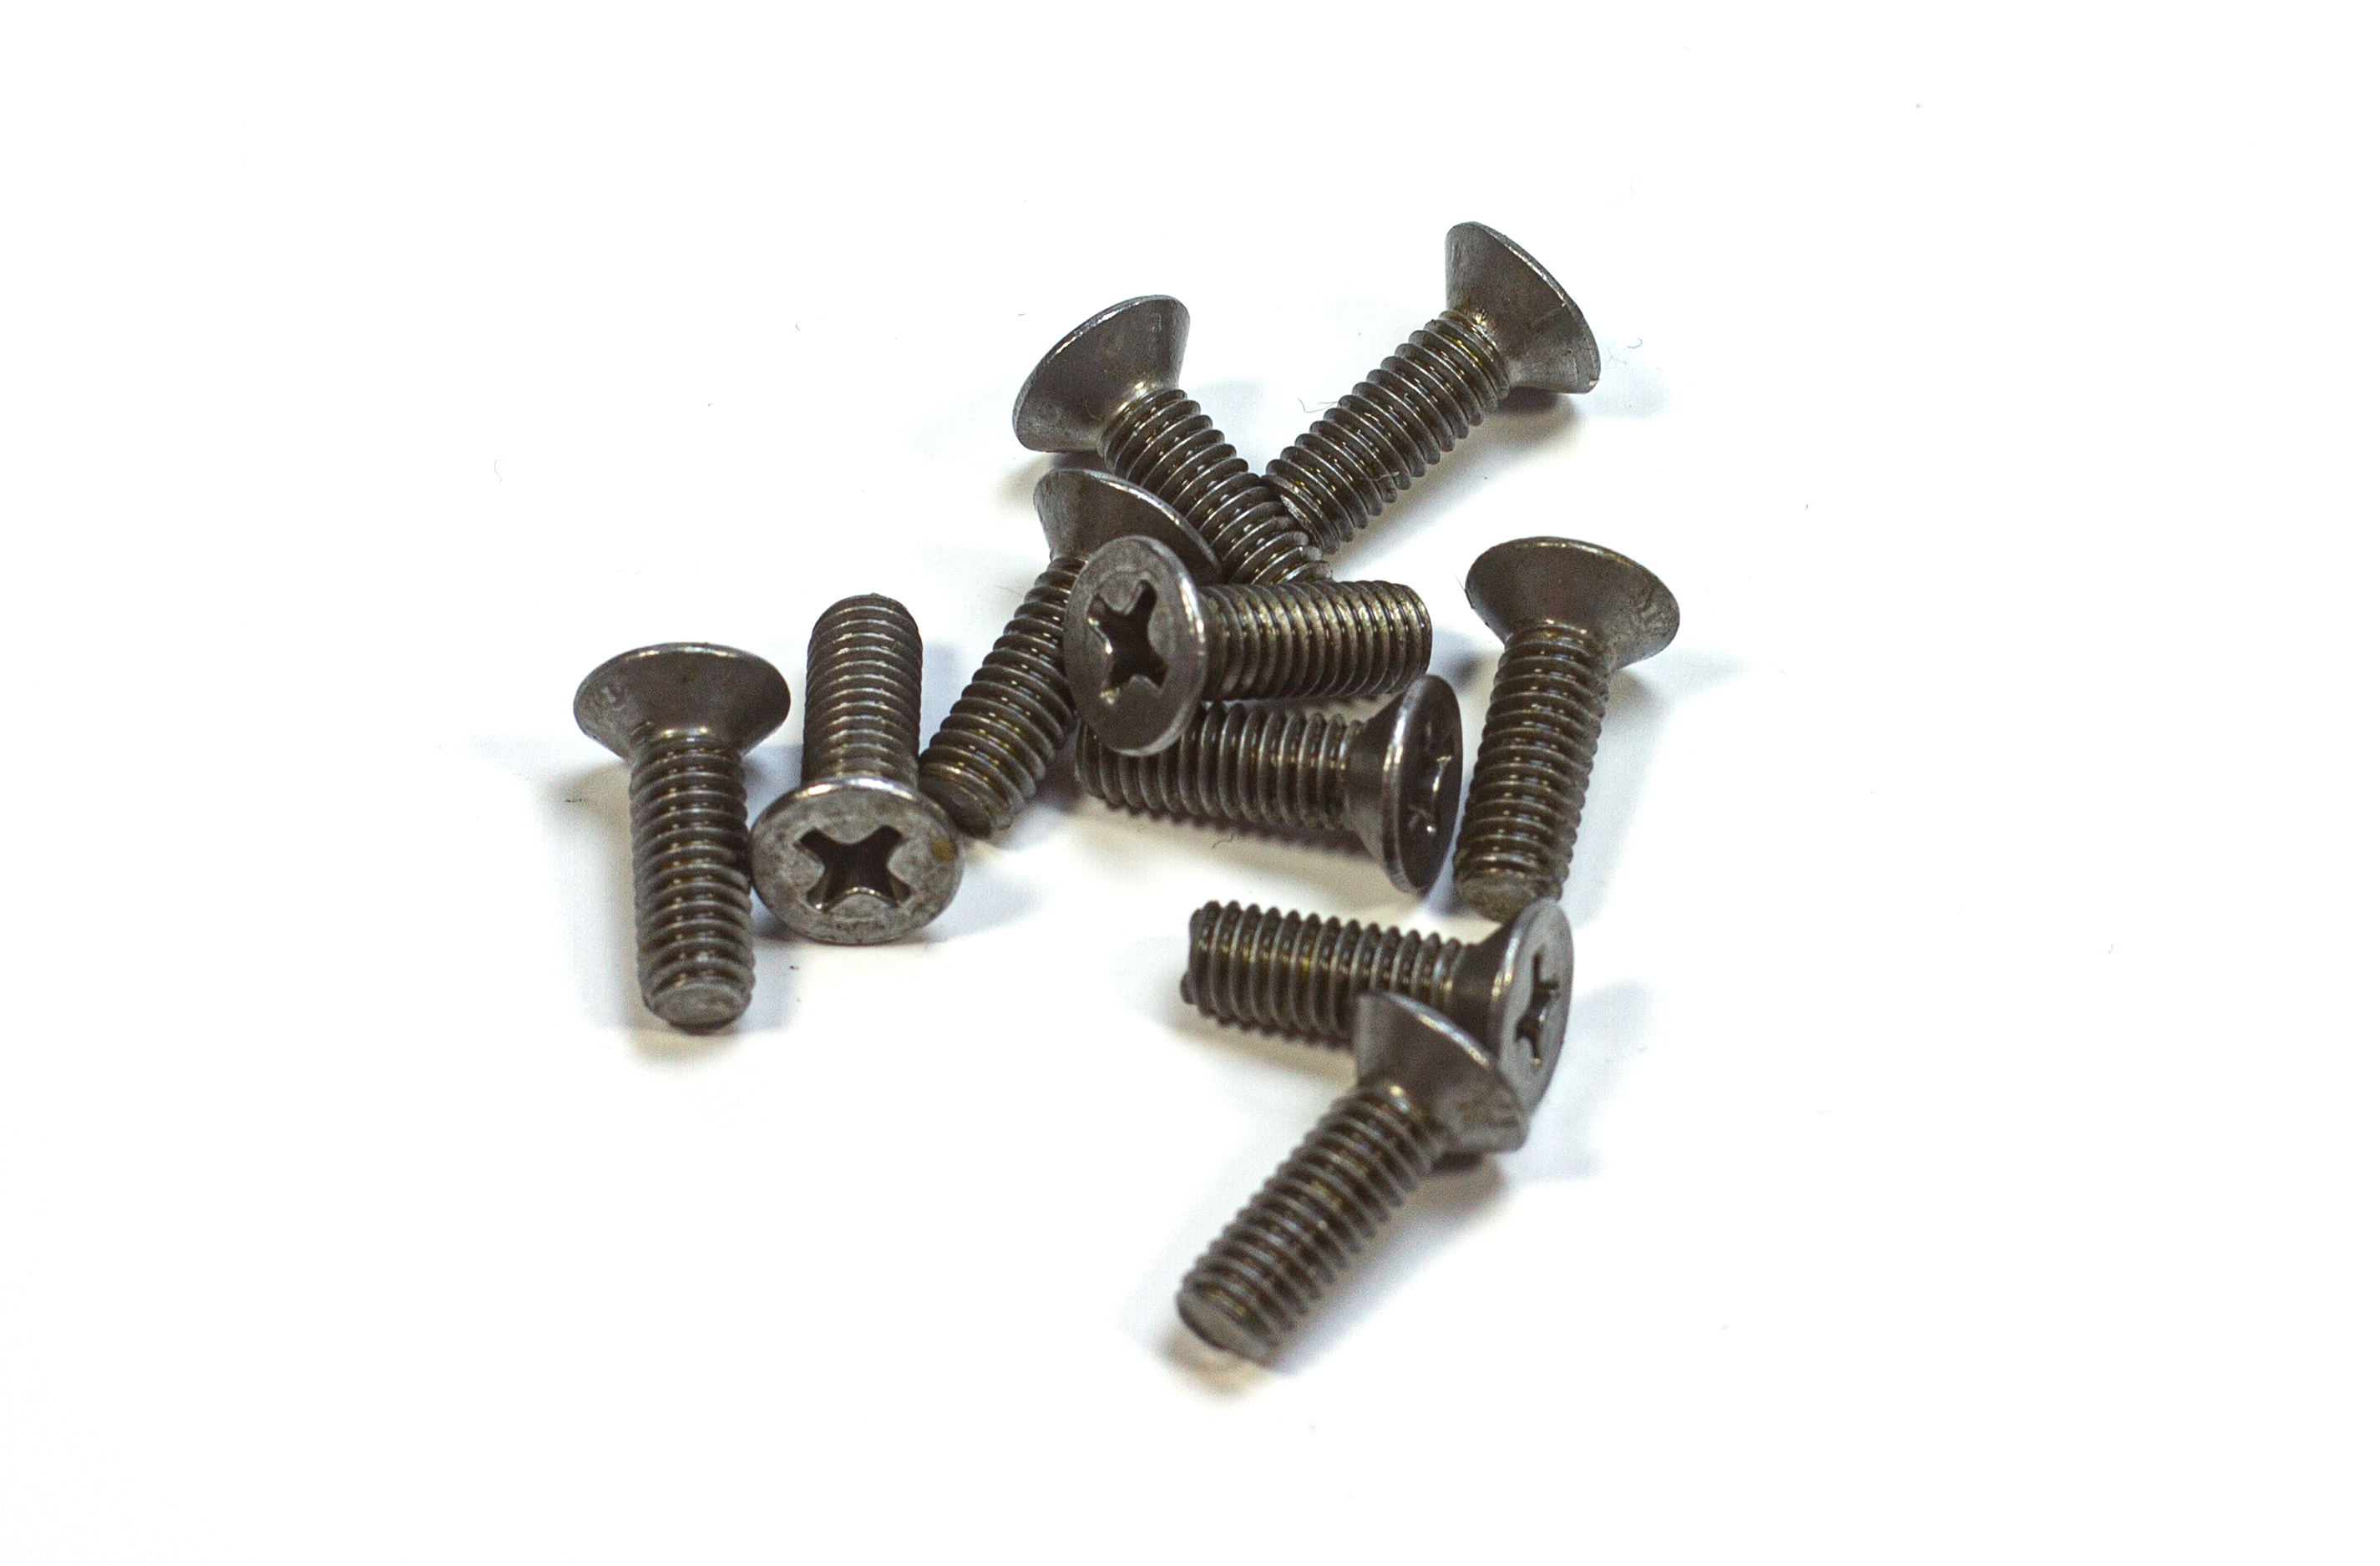 y6718/12 Countersunk screw with cross recess M4x12 mm, 10 pieces